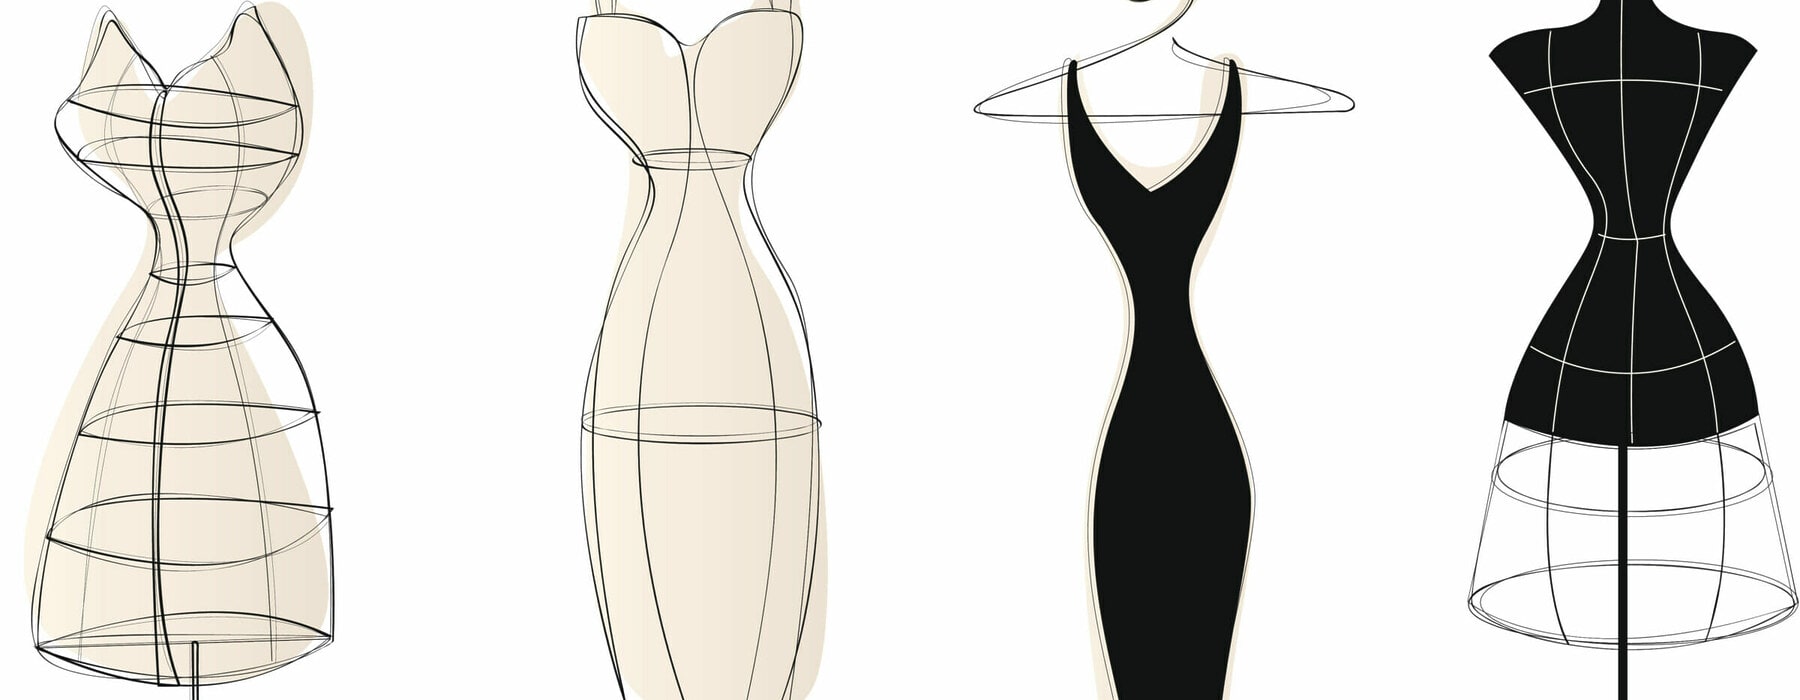 3 vintage-style dress forms and an elegant dress on a hanger.